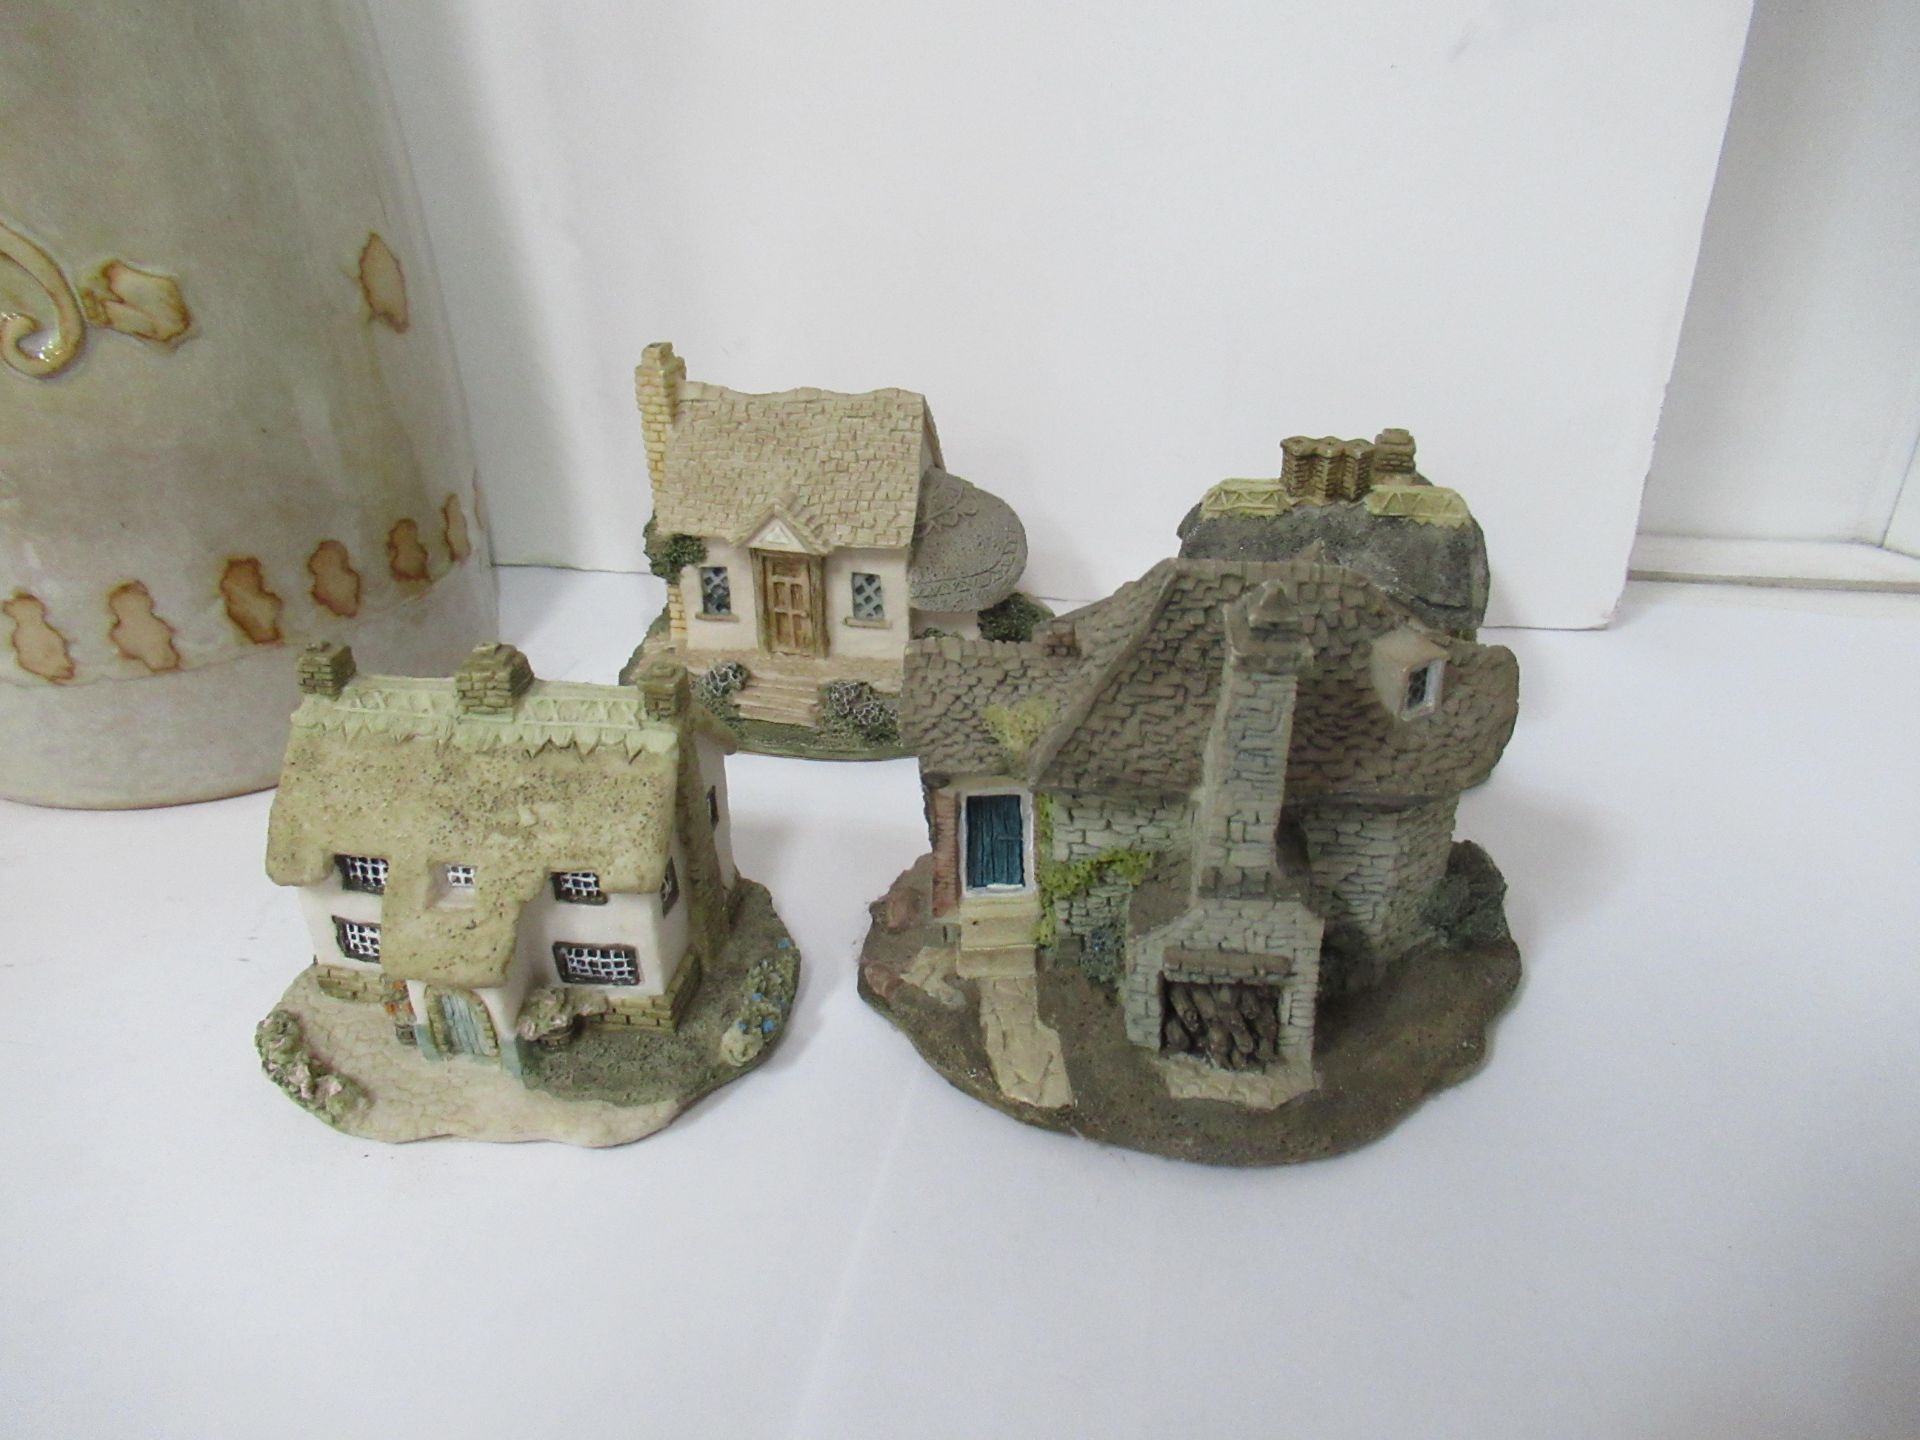 Nativity scene, 4x model houses and tall figure of Santa - Image 4 of 11